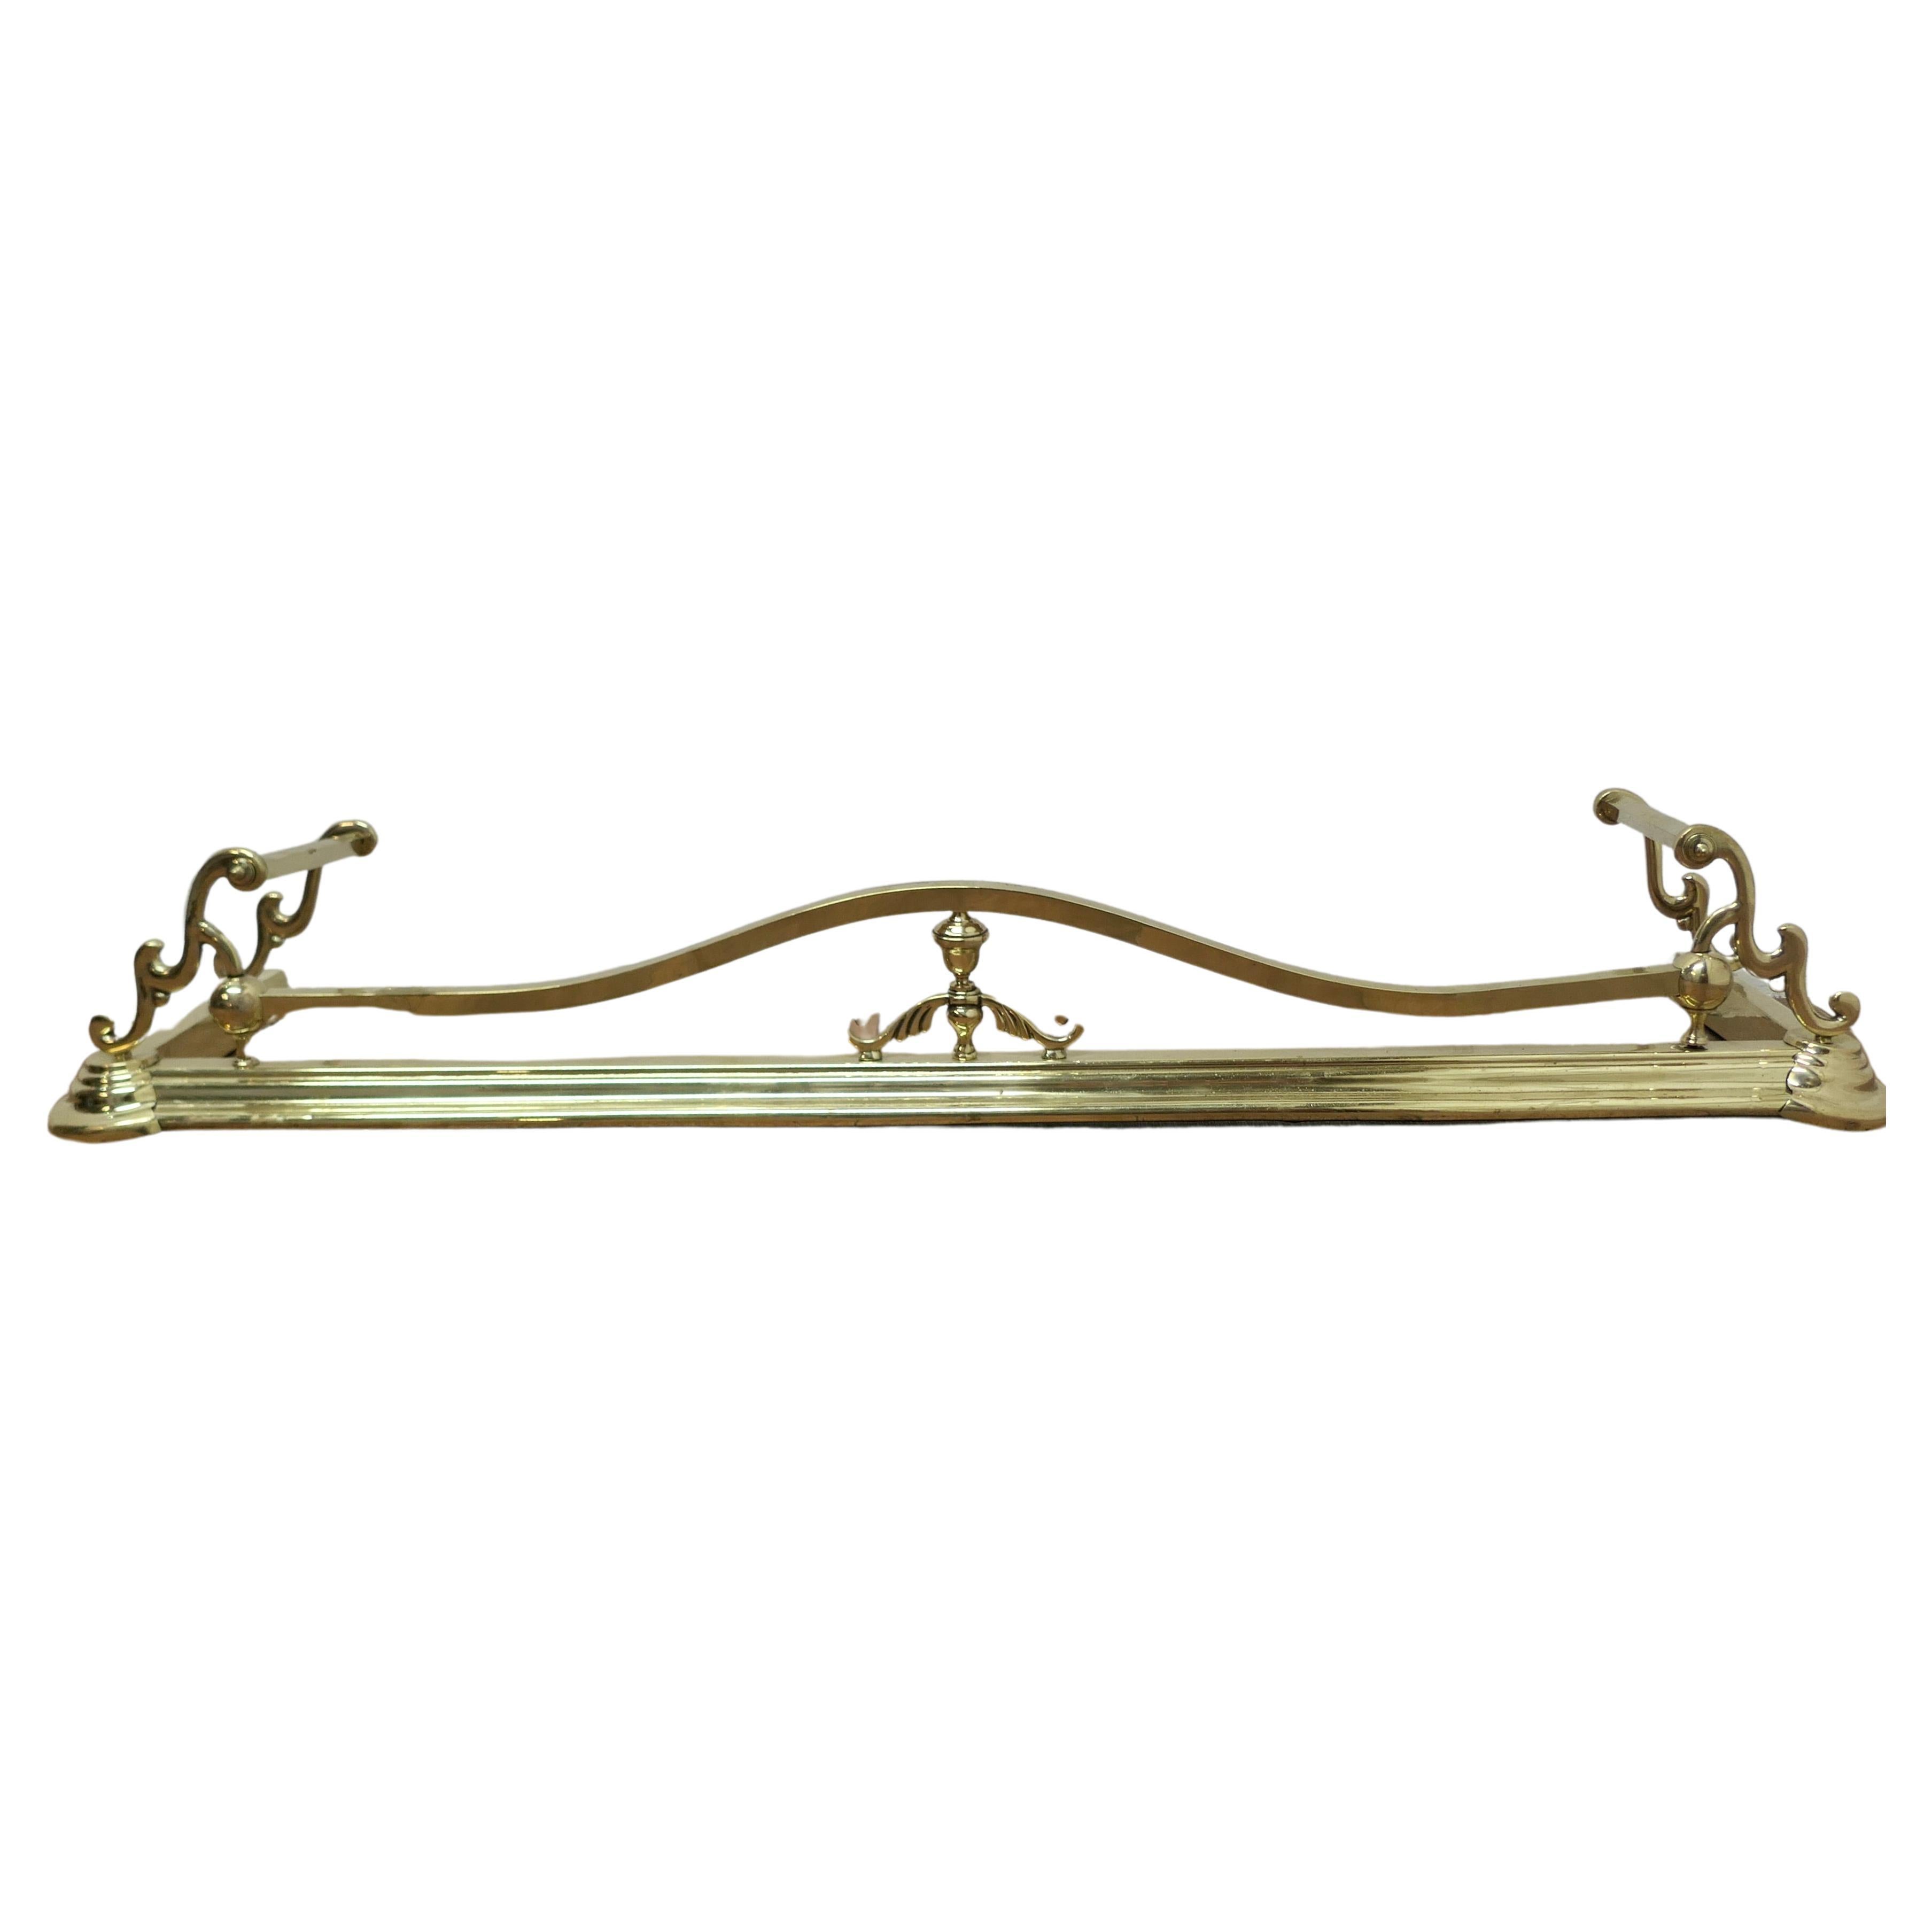 Long Art Nouveau Brass Fender  This is a Beautifully Designed Victorian Fender